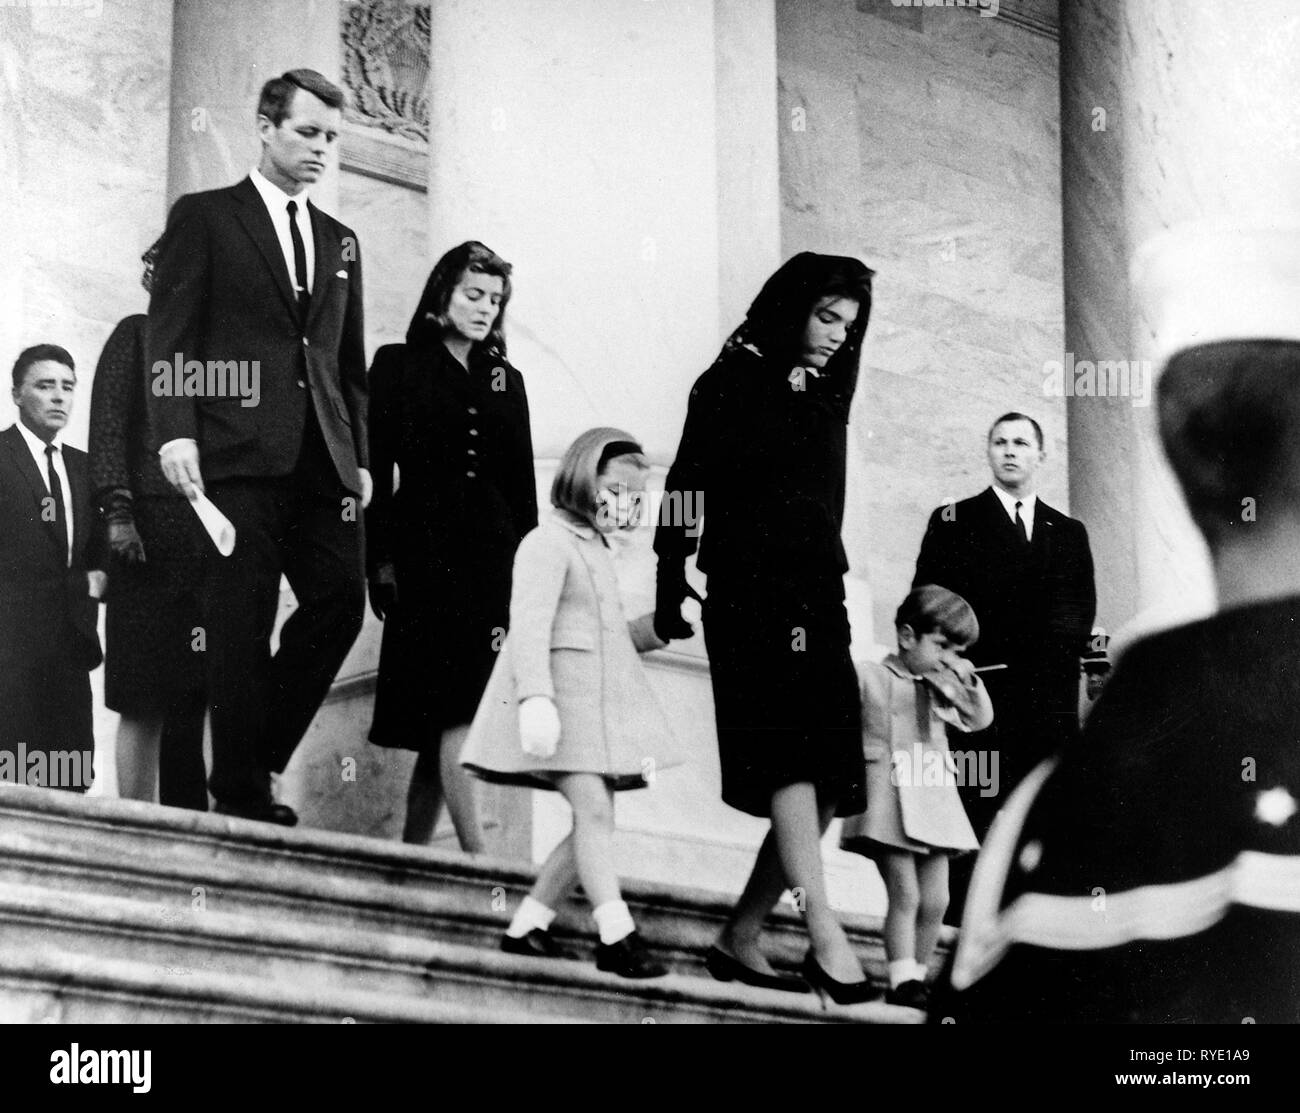 President's Family leaves Capitol after Ceremony. Caroline Kennedy, Jacqueline Bouvier Kennedy, John F. Kennedy, Jr. (2nd row) Attorney General Robert F. Kennedy, Patricia Kennedy Lawford (hidden) Jean Kennedy Smith (3rd Row) Peter Lawford. United States Capitol, East Front, Washington, D.C. Stock Photo